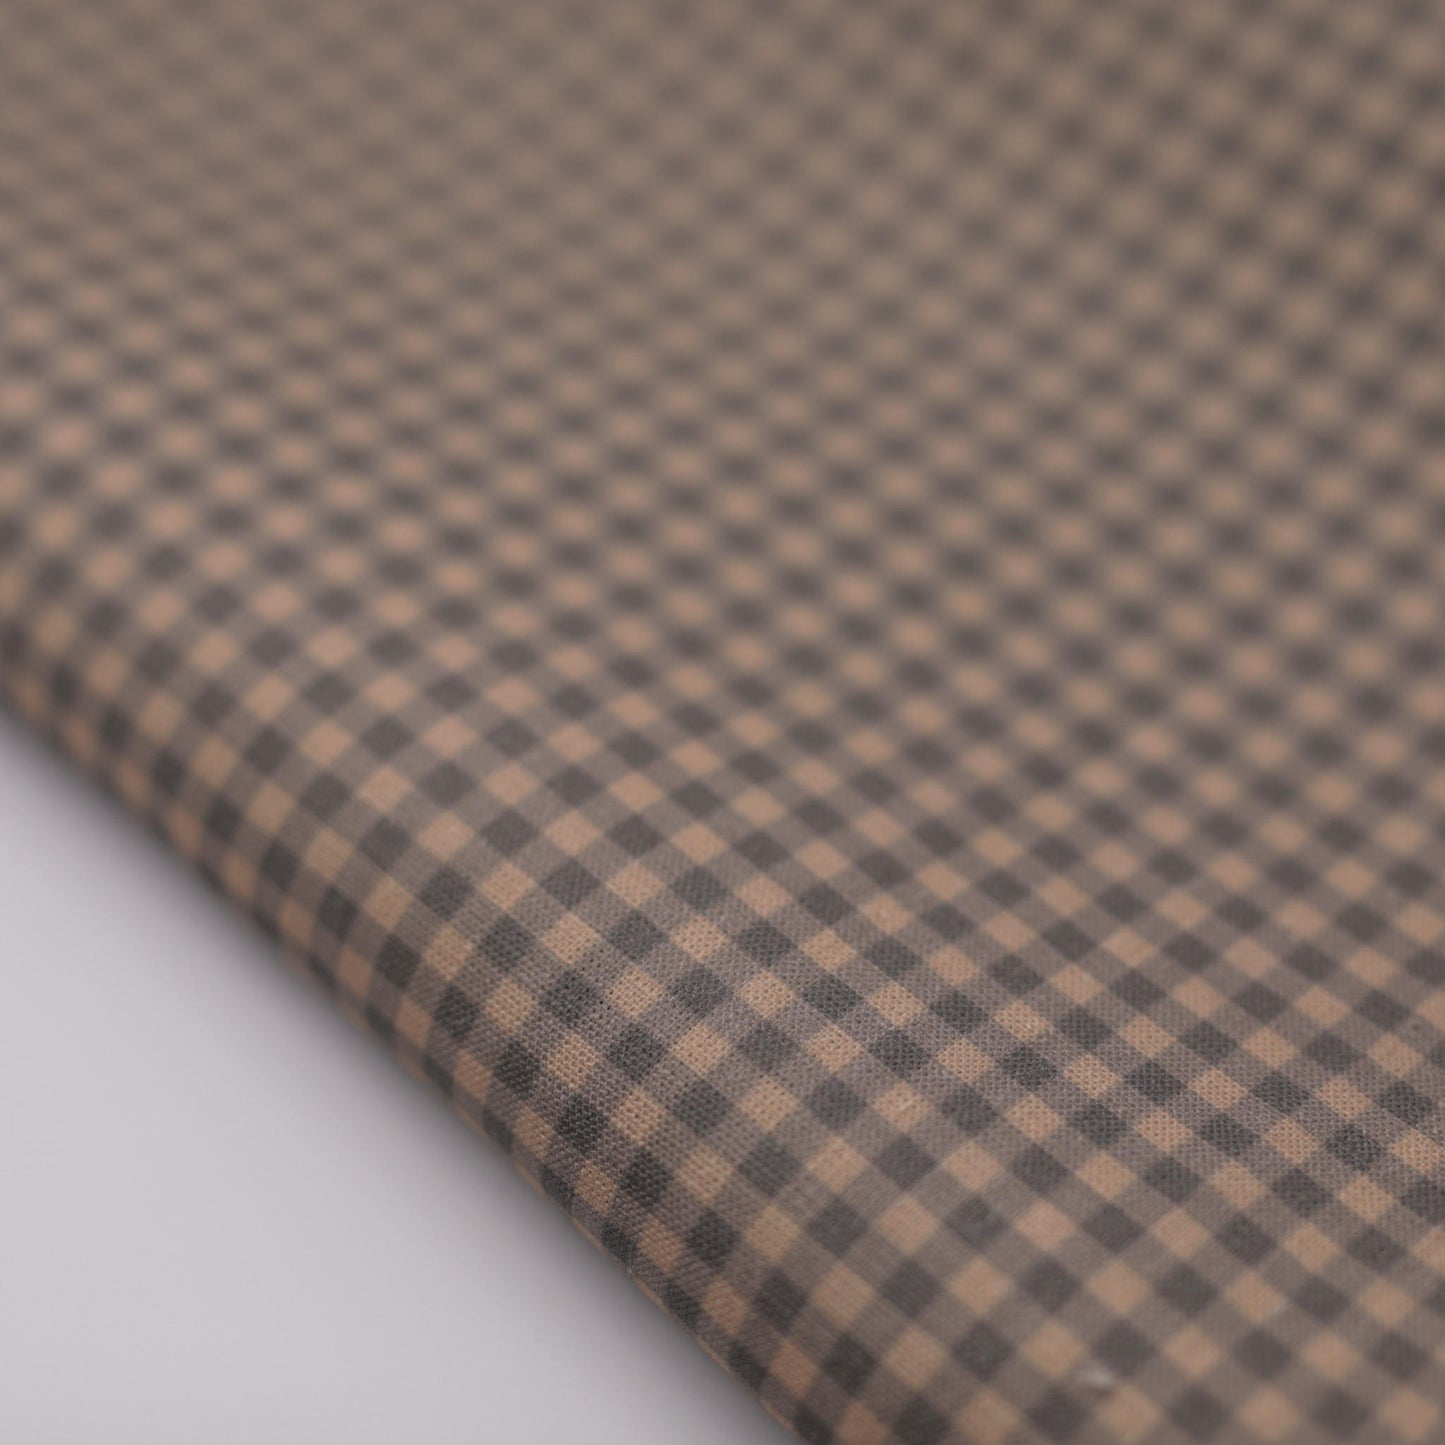 Taupe gingham 0.5 cm 100% linen fabric